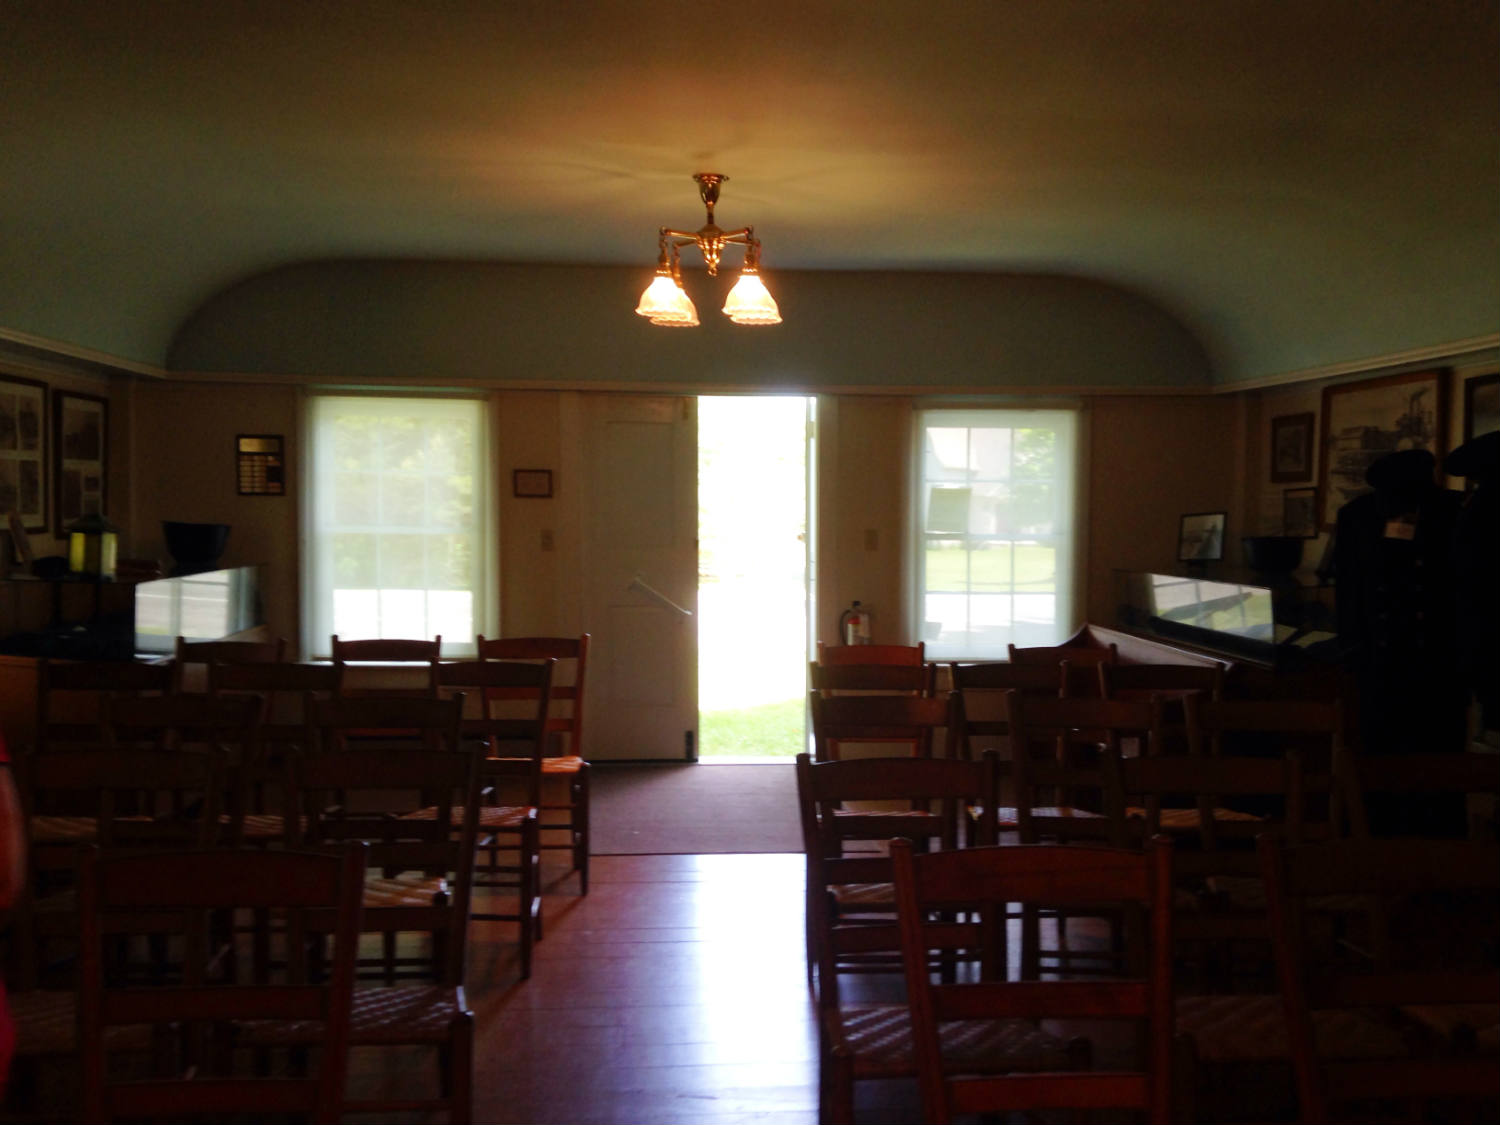 Inside the Baptist Meeting House in Ontario, NY